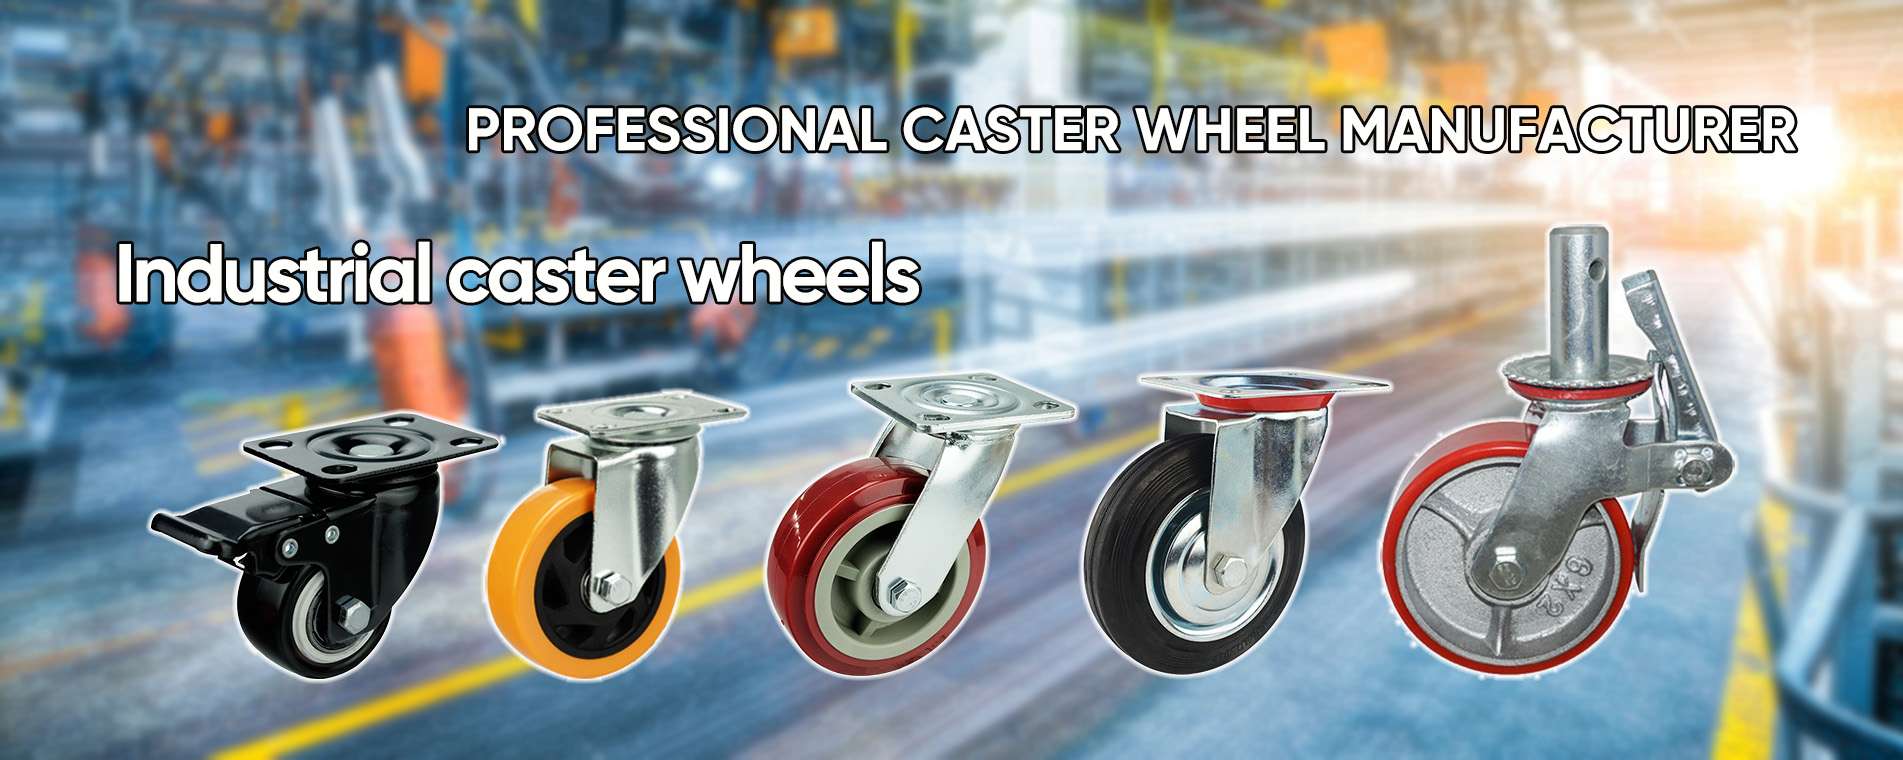 Manufacturing master of industrial casters